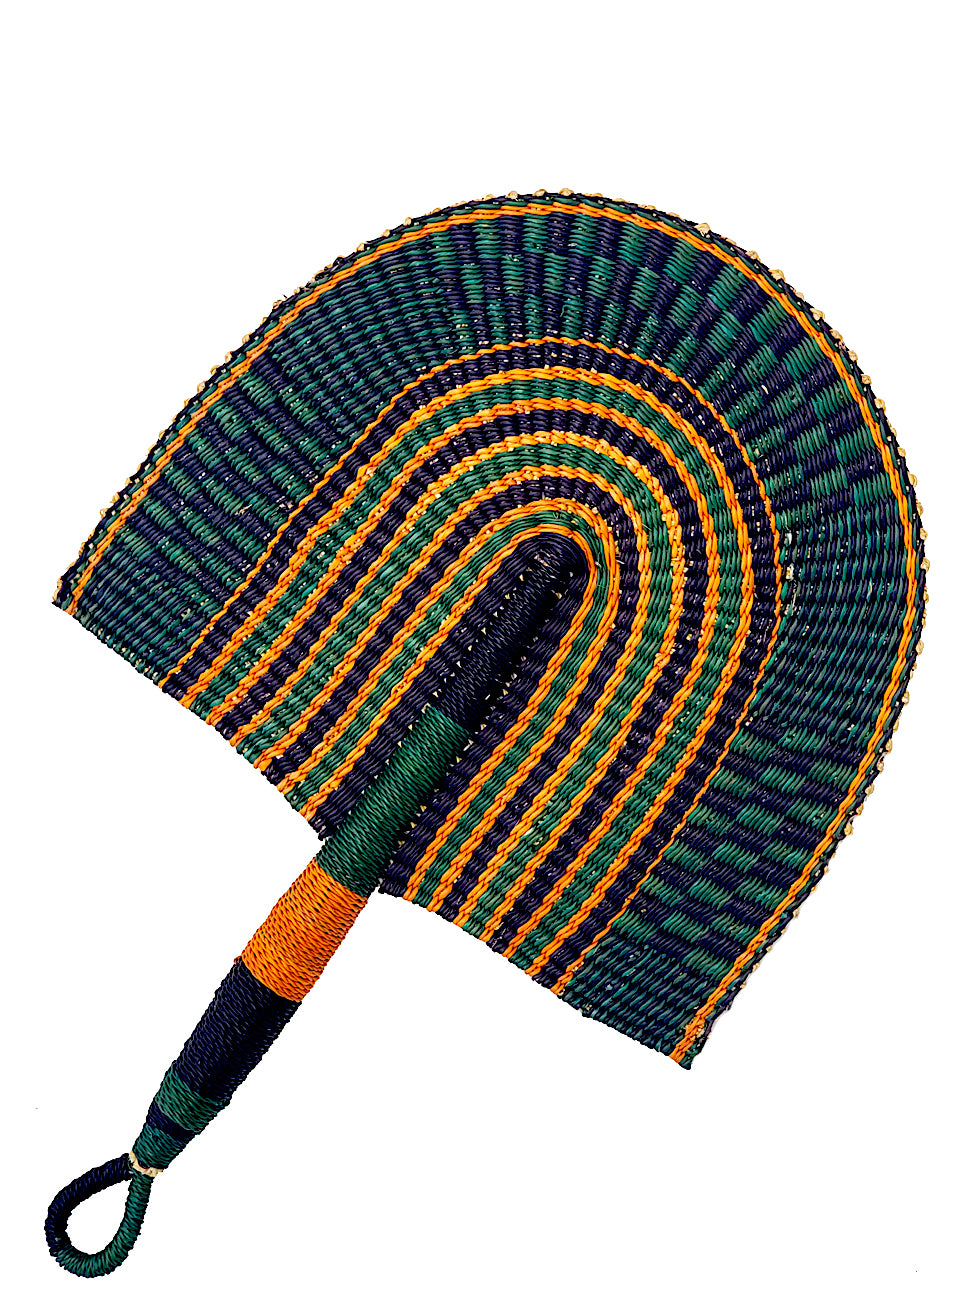 Large African Hand Woven Fan